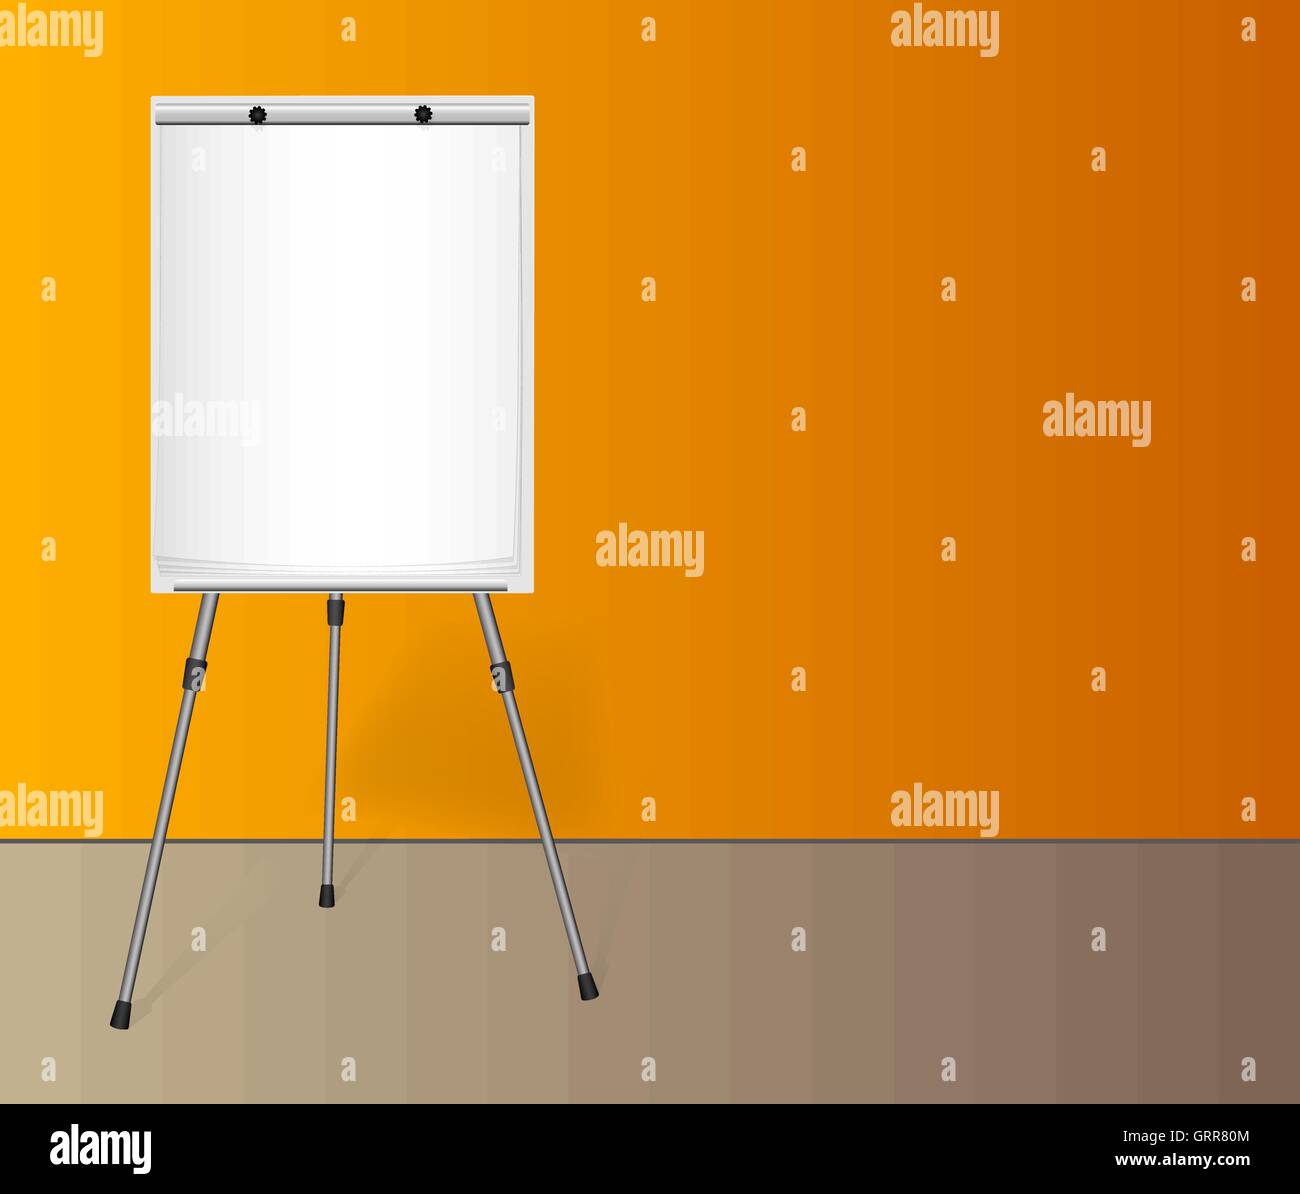 Flip Chart Isolated On White Background Sketch Vector Stock